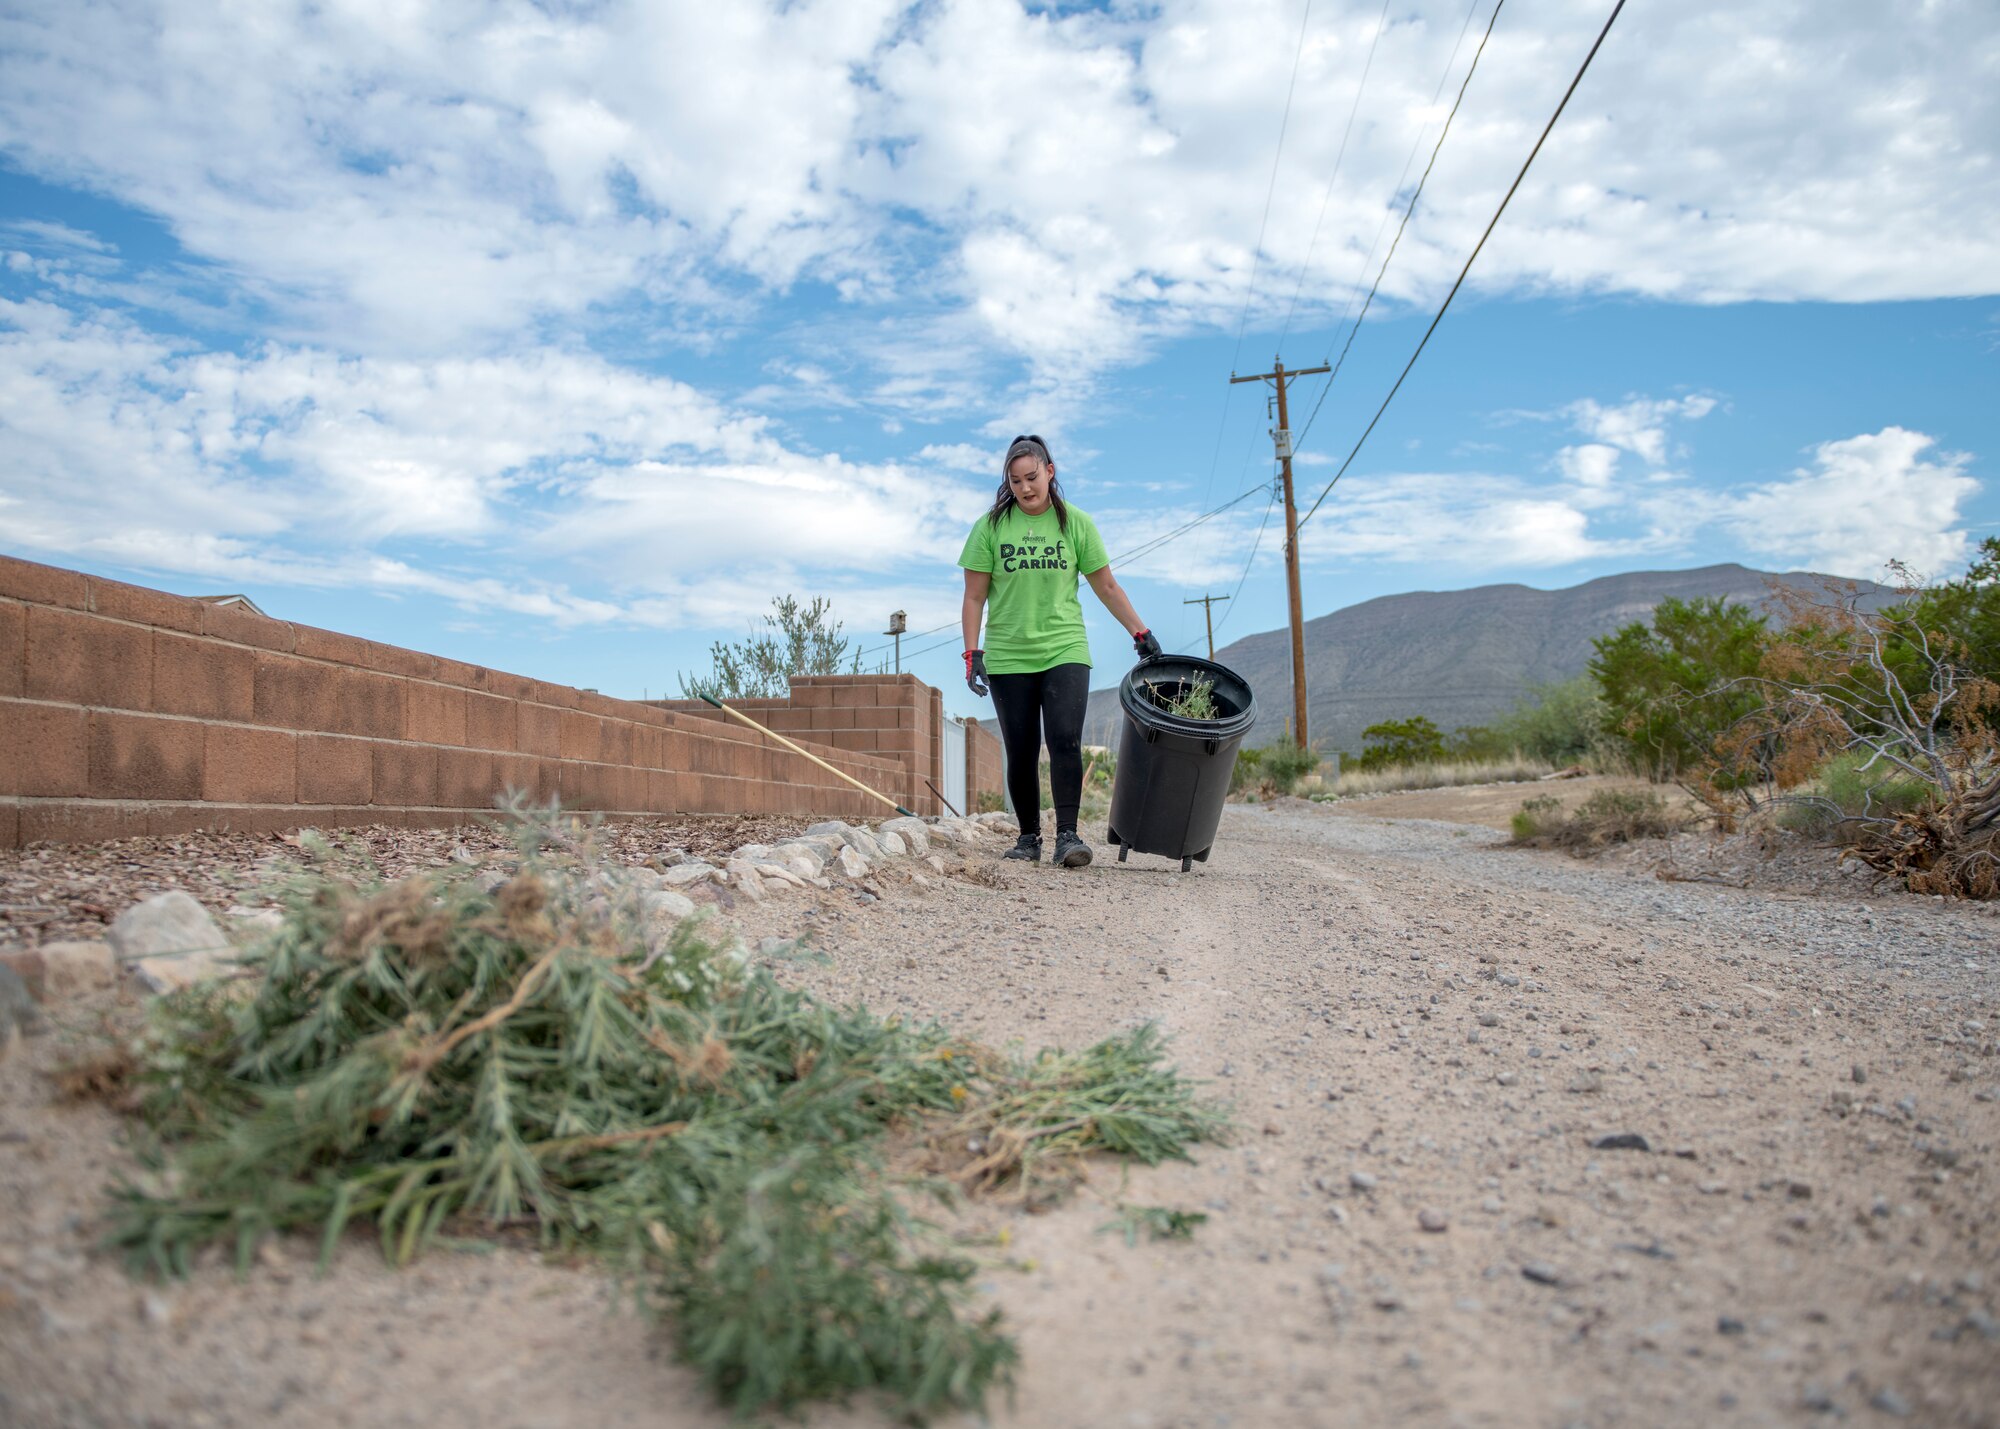 Tarah Martinez, a local community volunteer, throws away weeds, Sept. 6, 2019, at a residence in Alamogordo, N.M. Day of Caring volunteers performed various tasks, such as home repairs and yard work, at pre-determined job sites for individuals who are either unable to accomplish the tasks themselves or do not the resources to do so. (U.S. Air Force photo by Airman 1st Class Kindra Stewart)